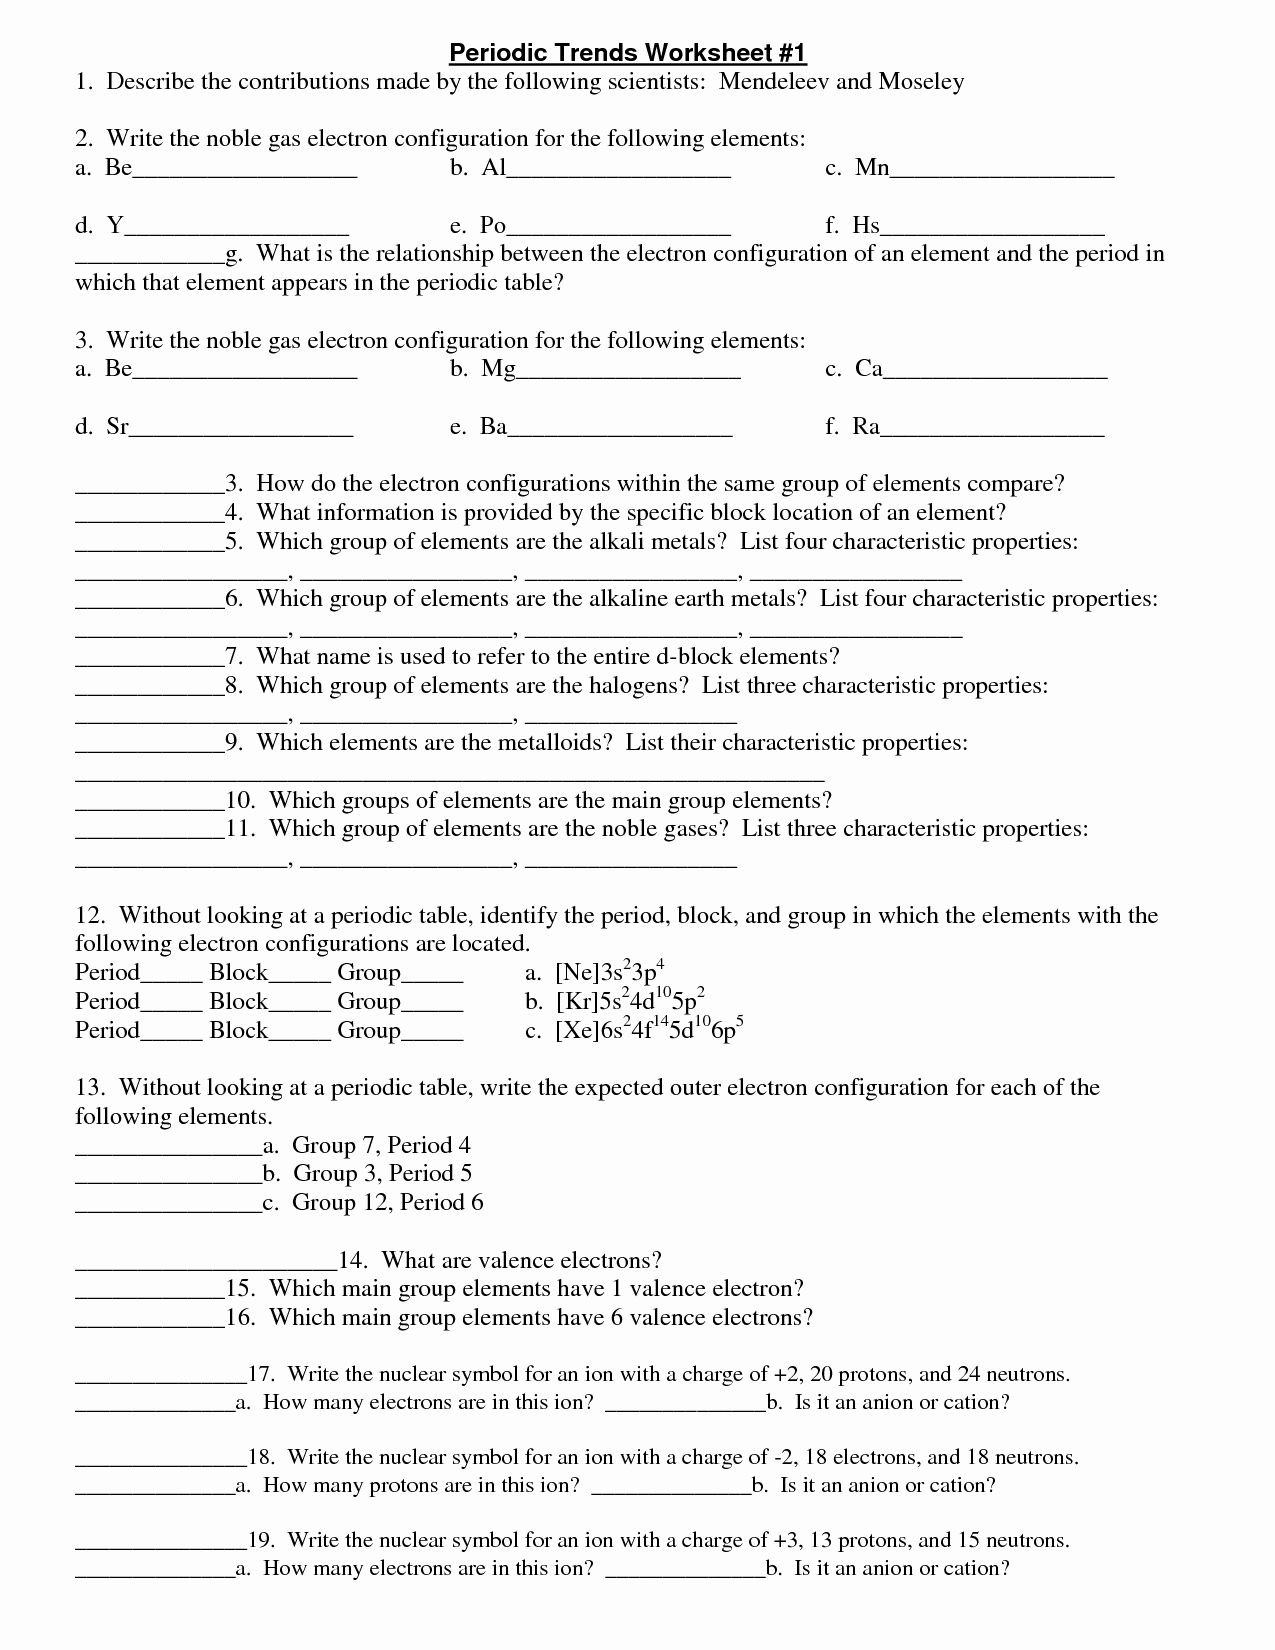 Periodic Trends Worksheet Answer Key 50 Periodic Trends Worksheet Answer Key In 2020